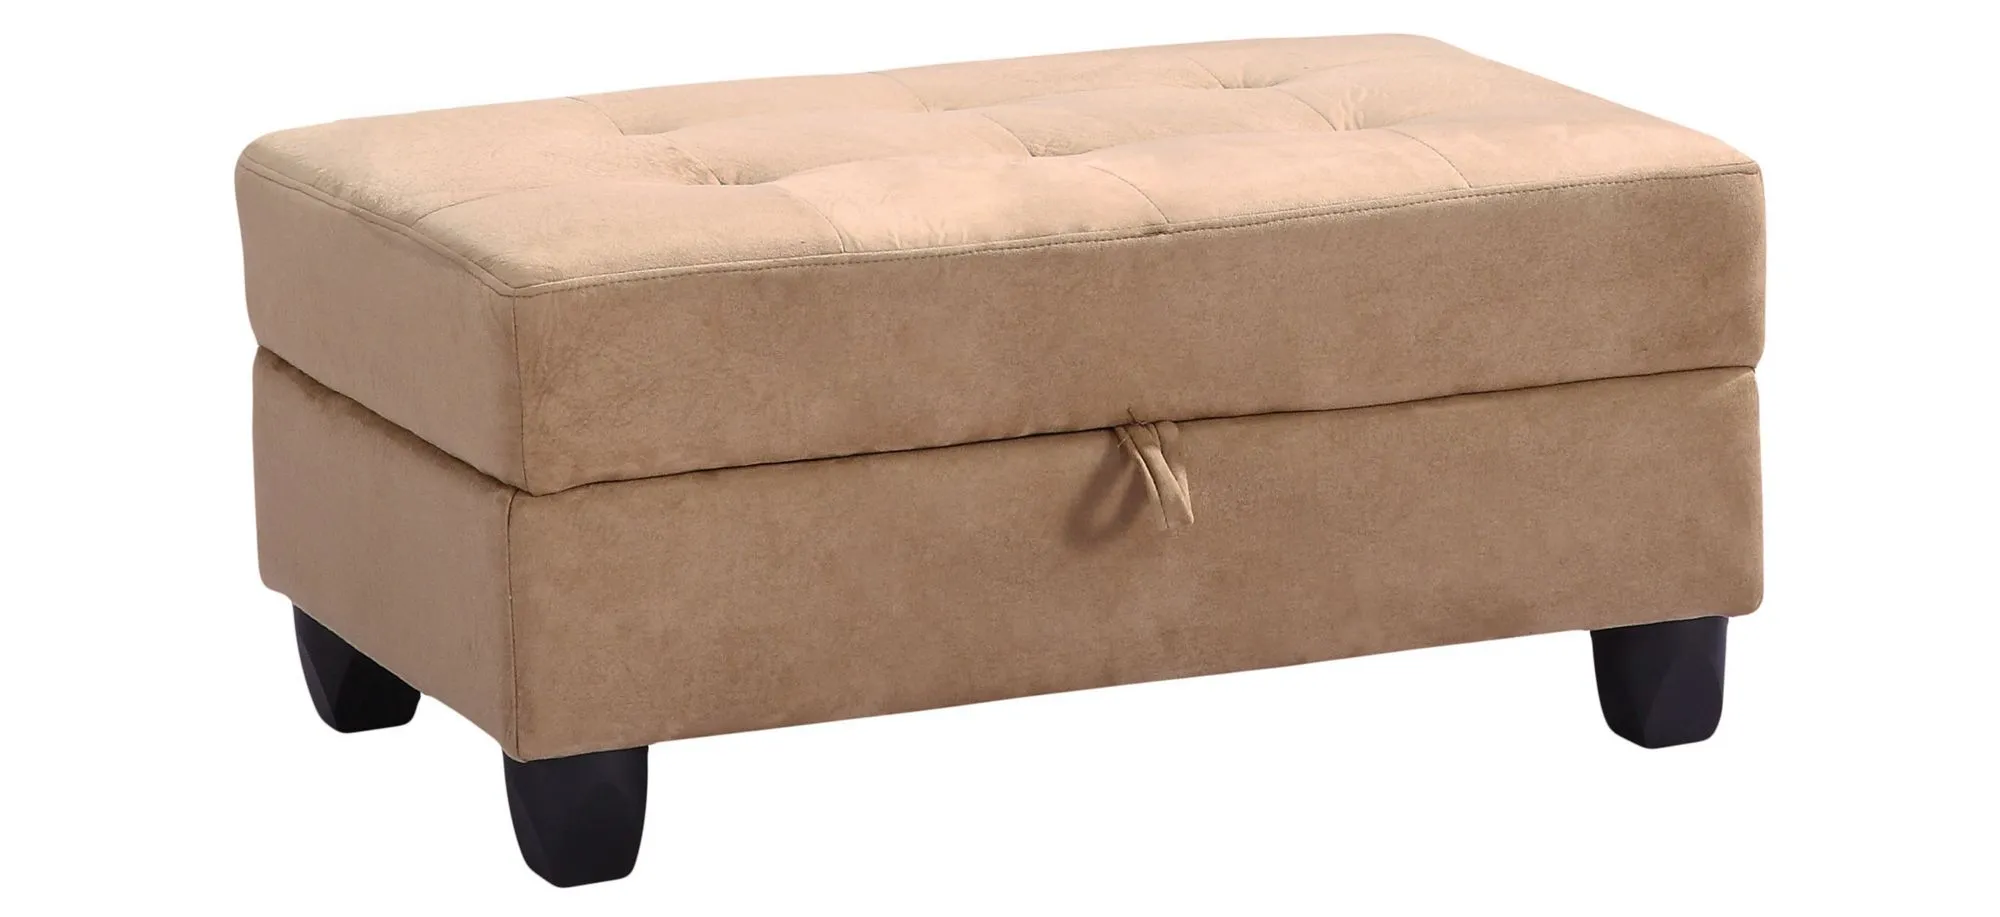 Gallant Storage Ottoman in Saddle by Glory Furniture